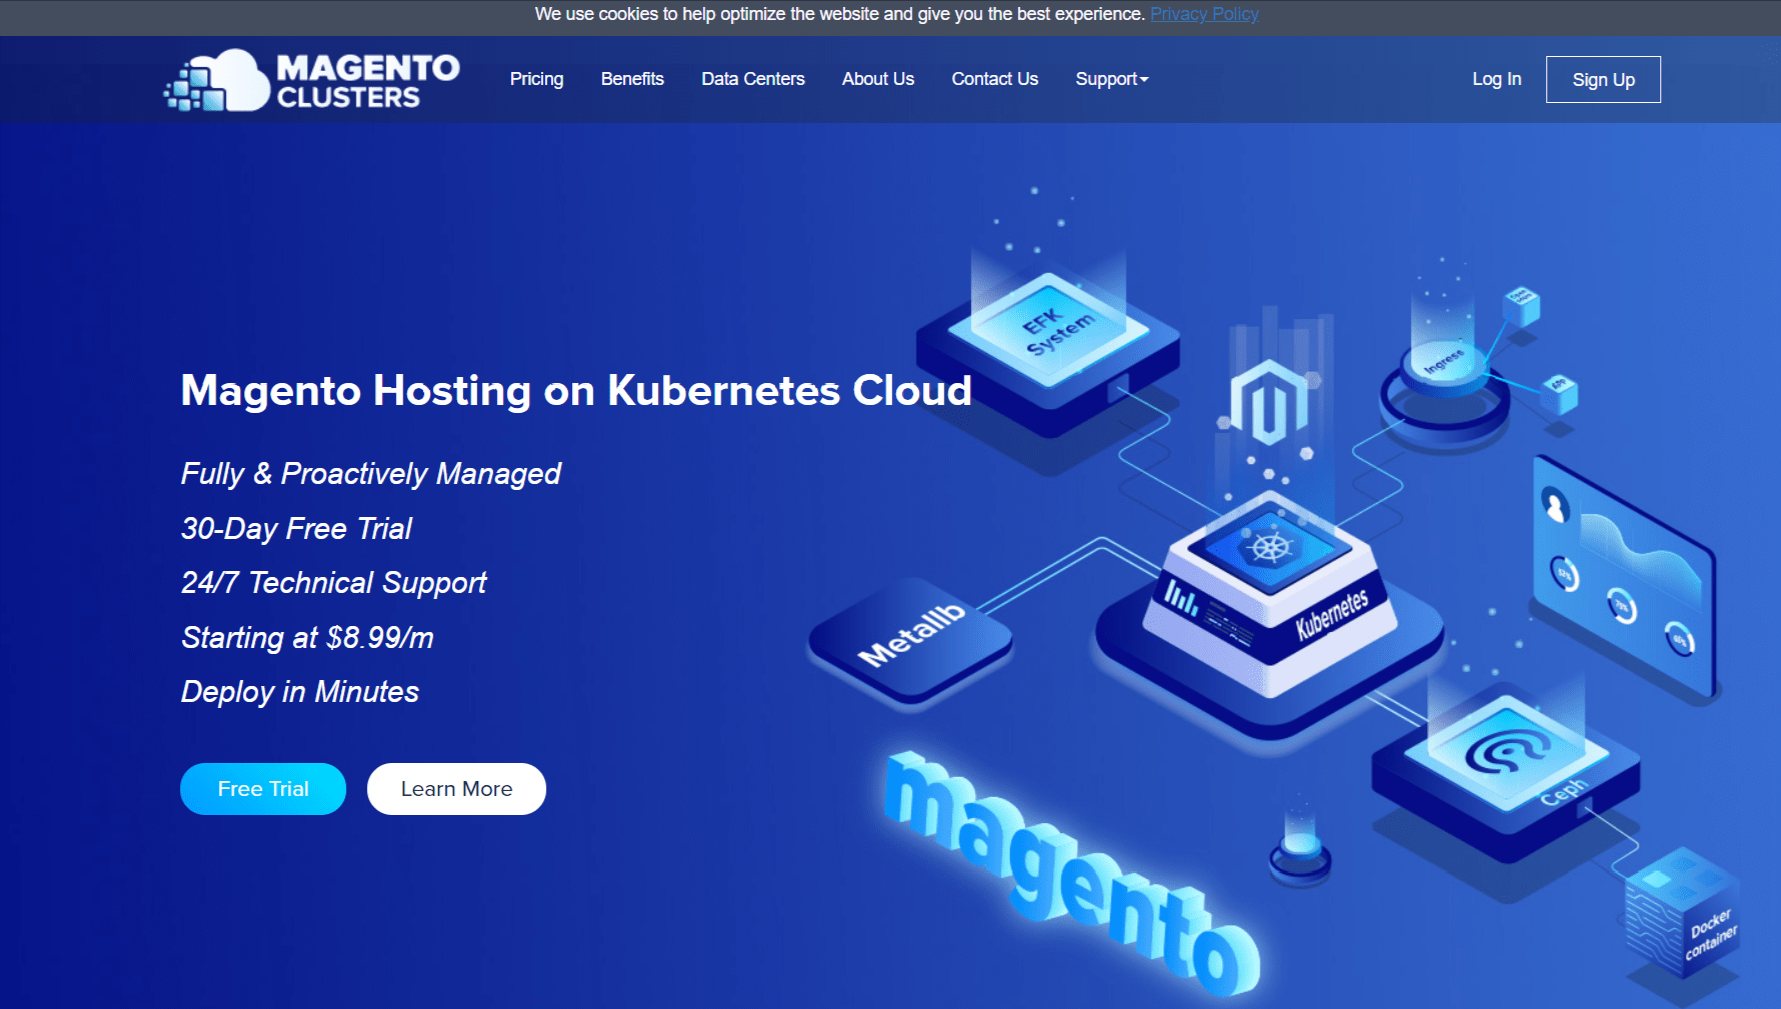 Magento clusters offer scalable services